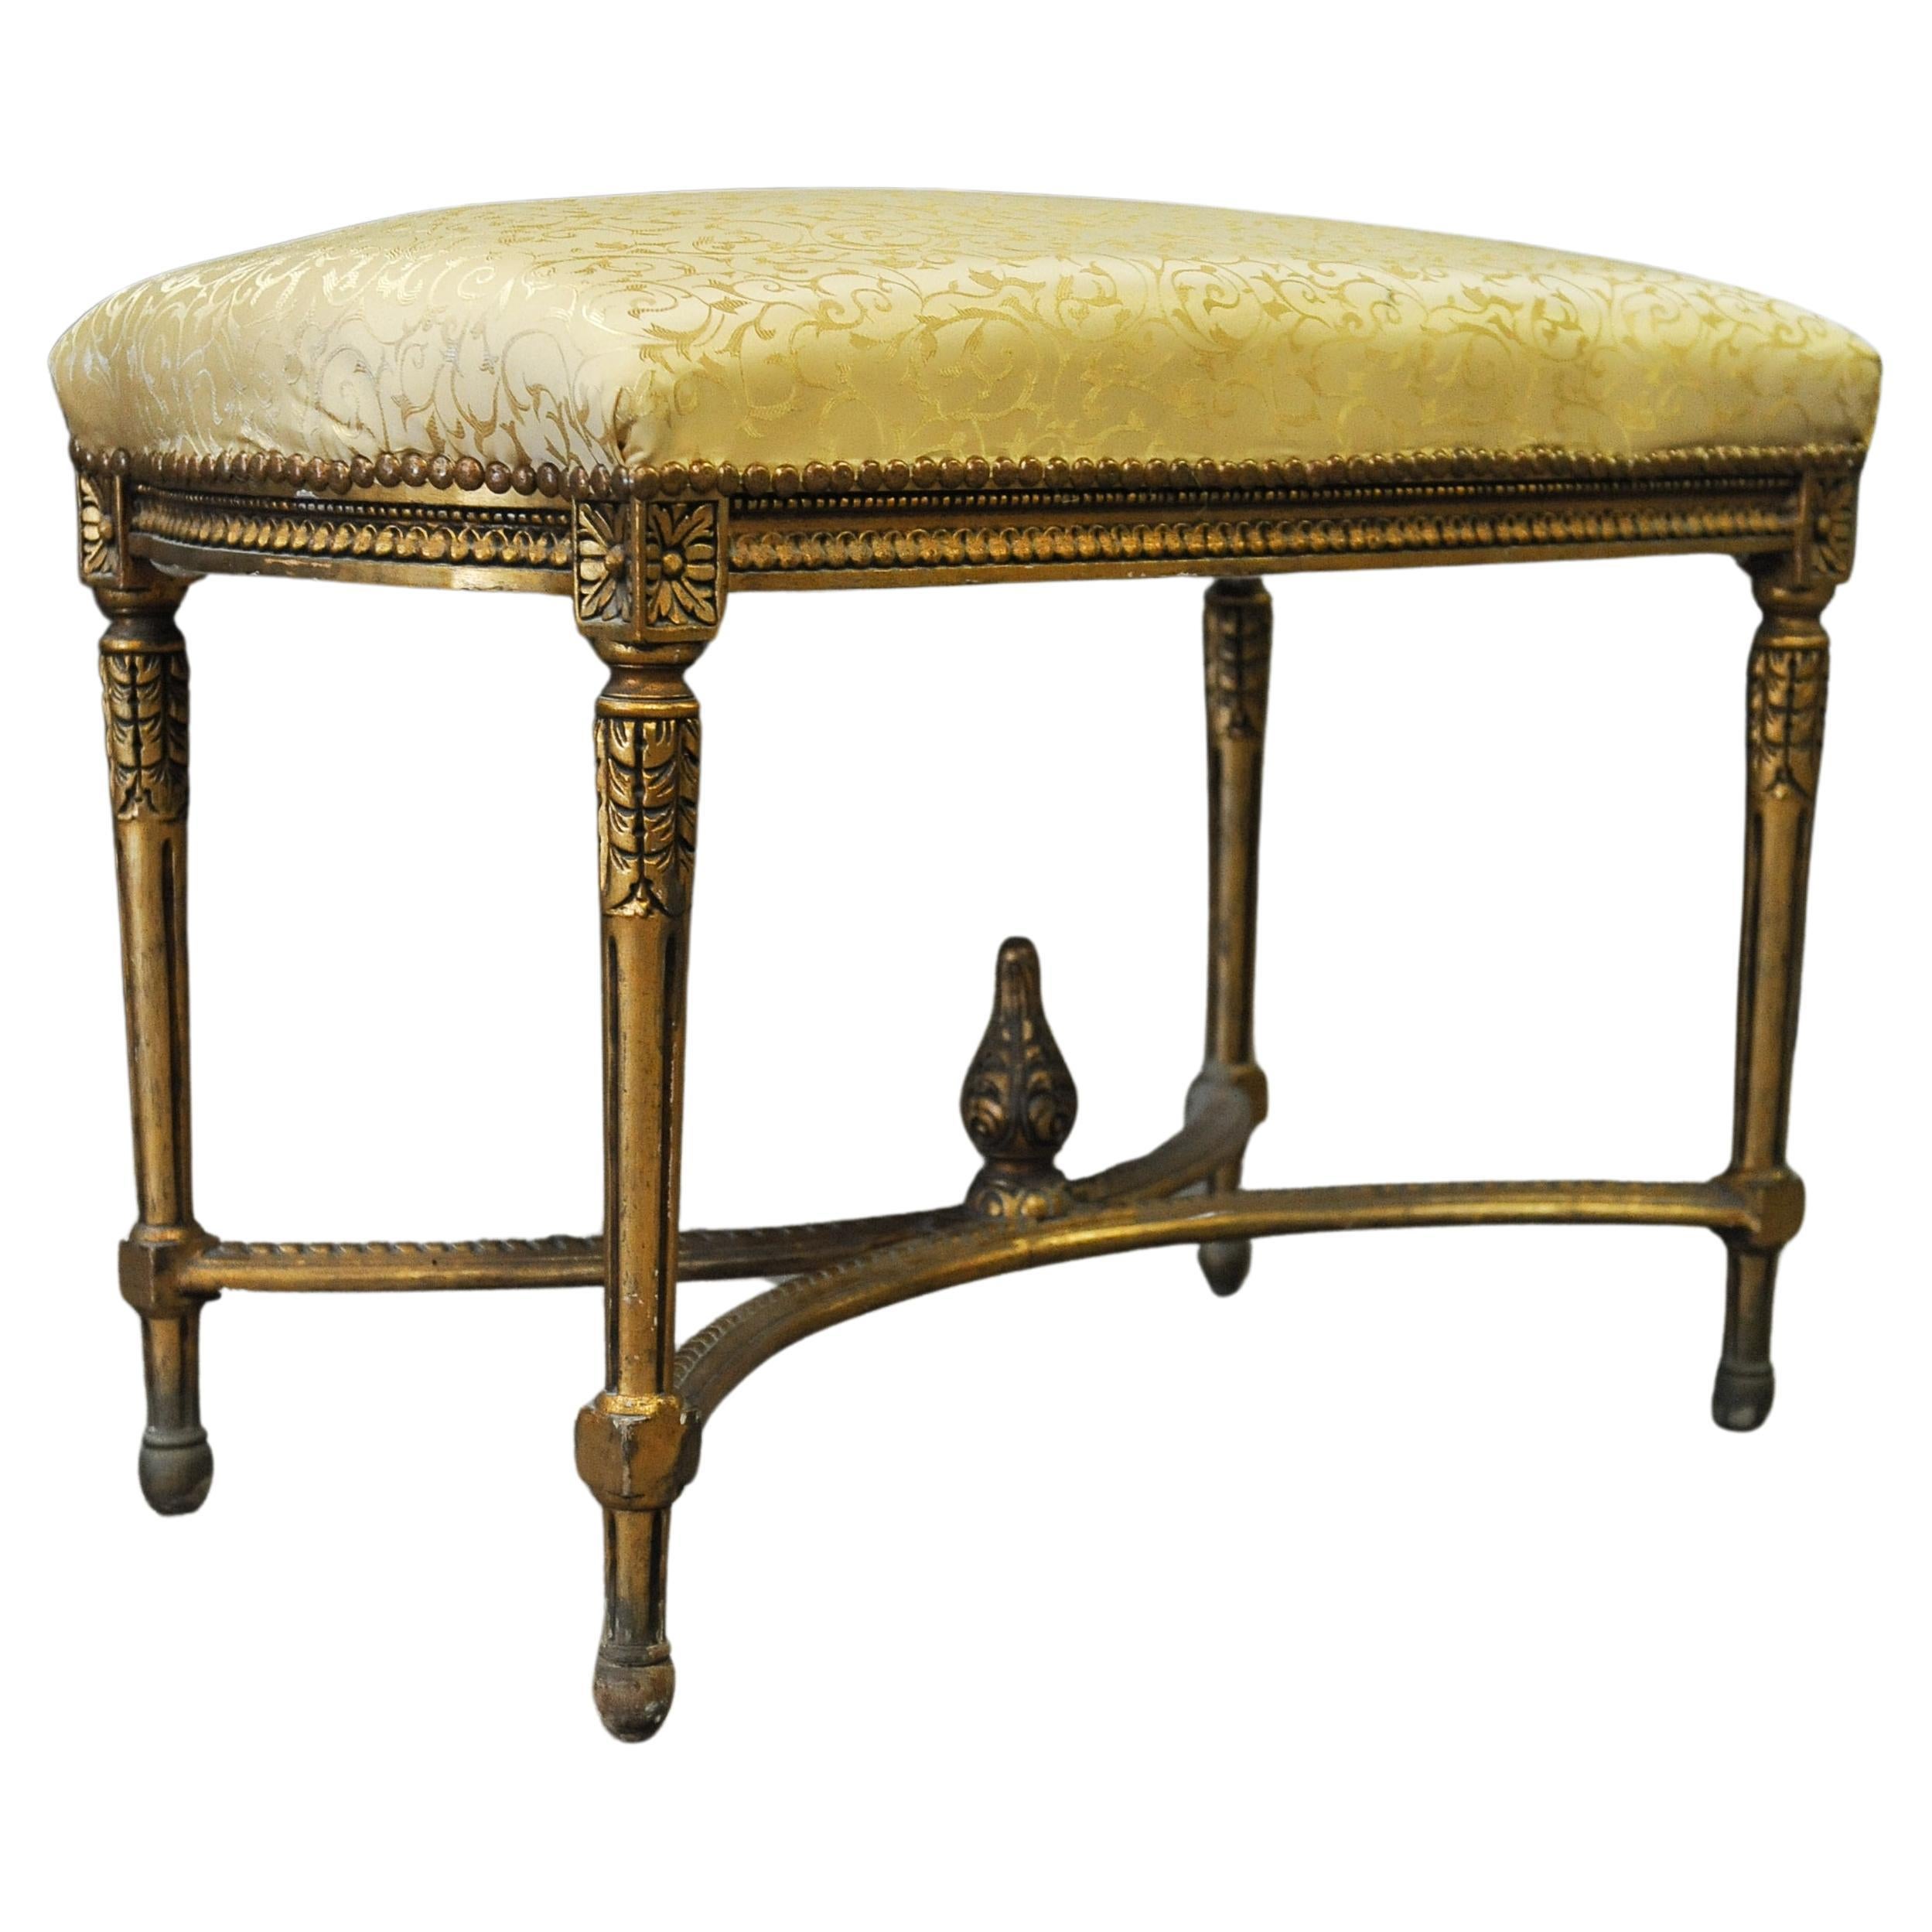 French Gilt Wood Bench Window Seat With Gilt Carved Floral Motifs, Befitted With Damask Floral Gold Upholstery, Finished With Brass Stud Detailing 1800's

